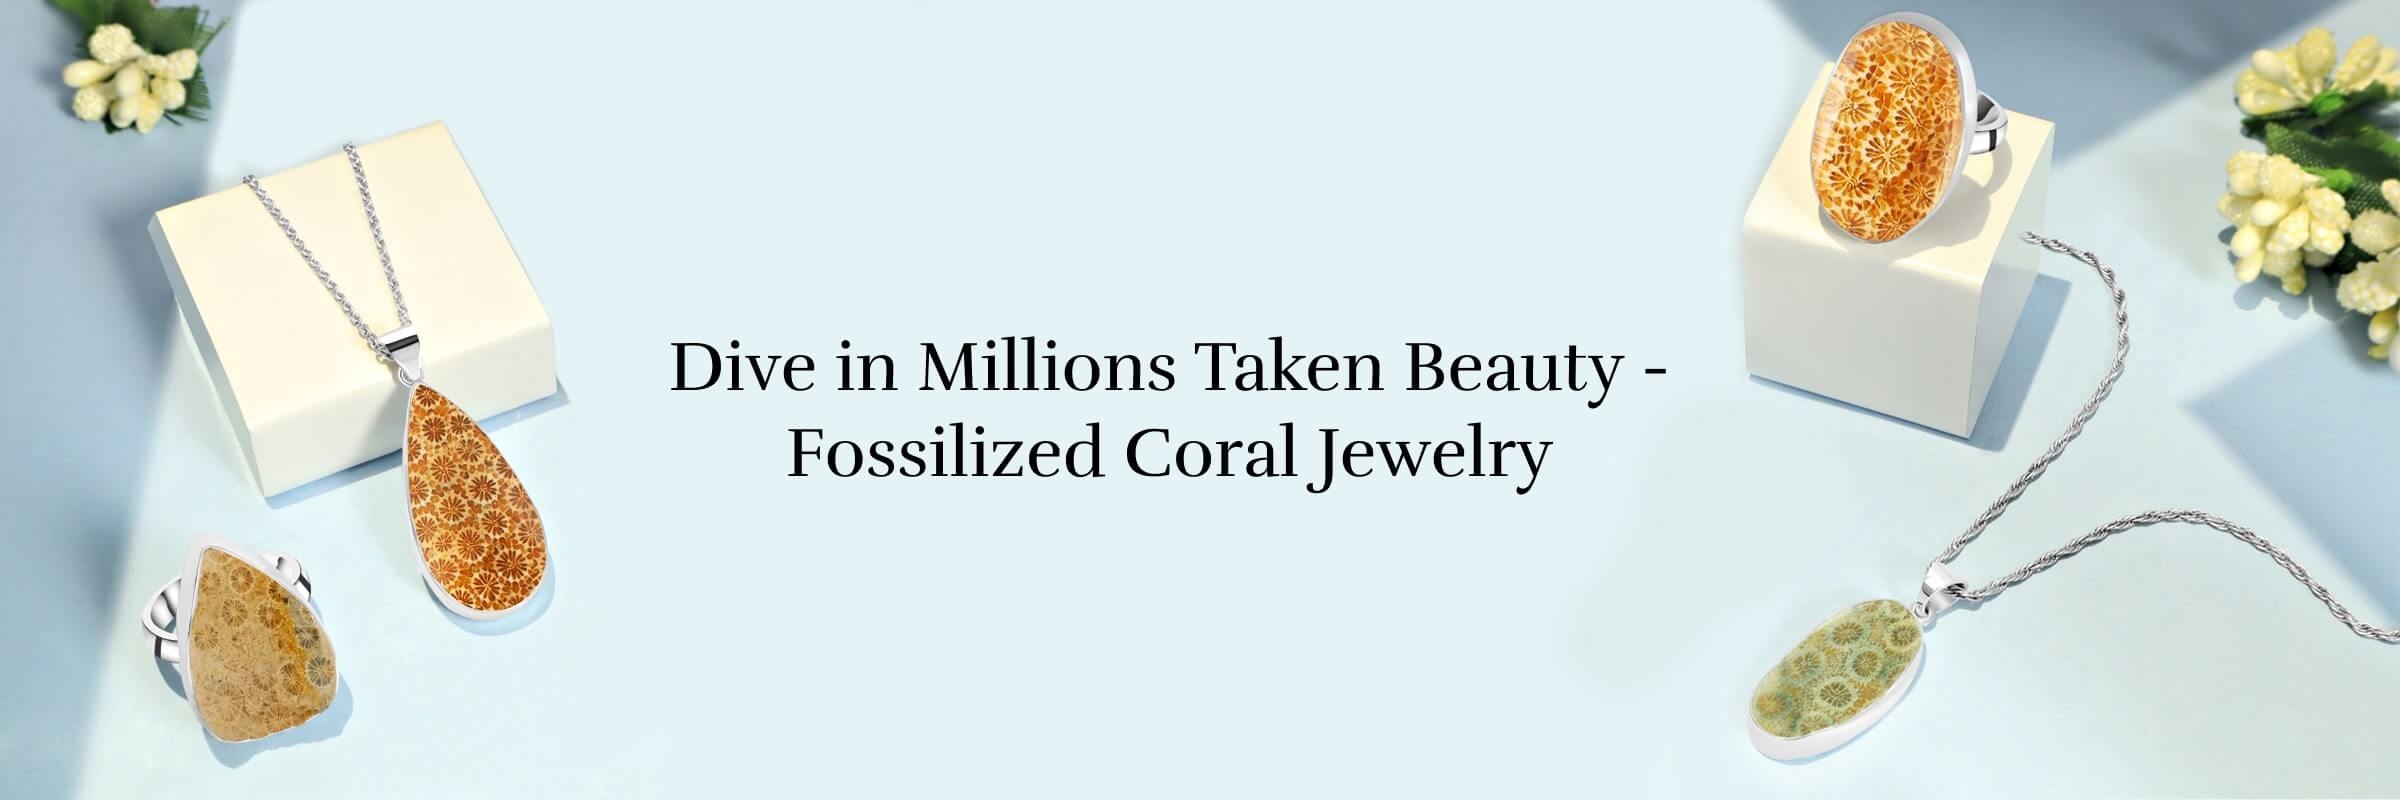 Fossilized Coral Jewelry